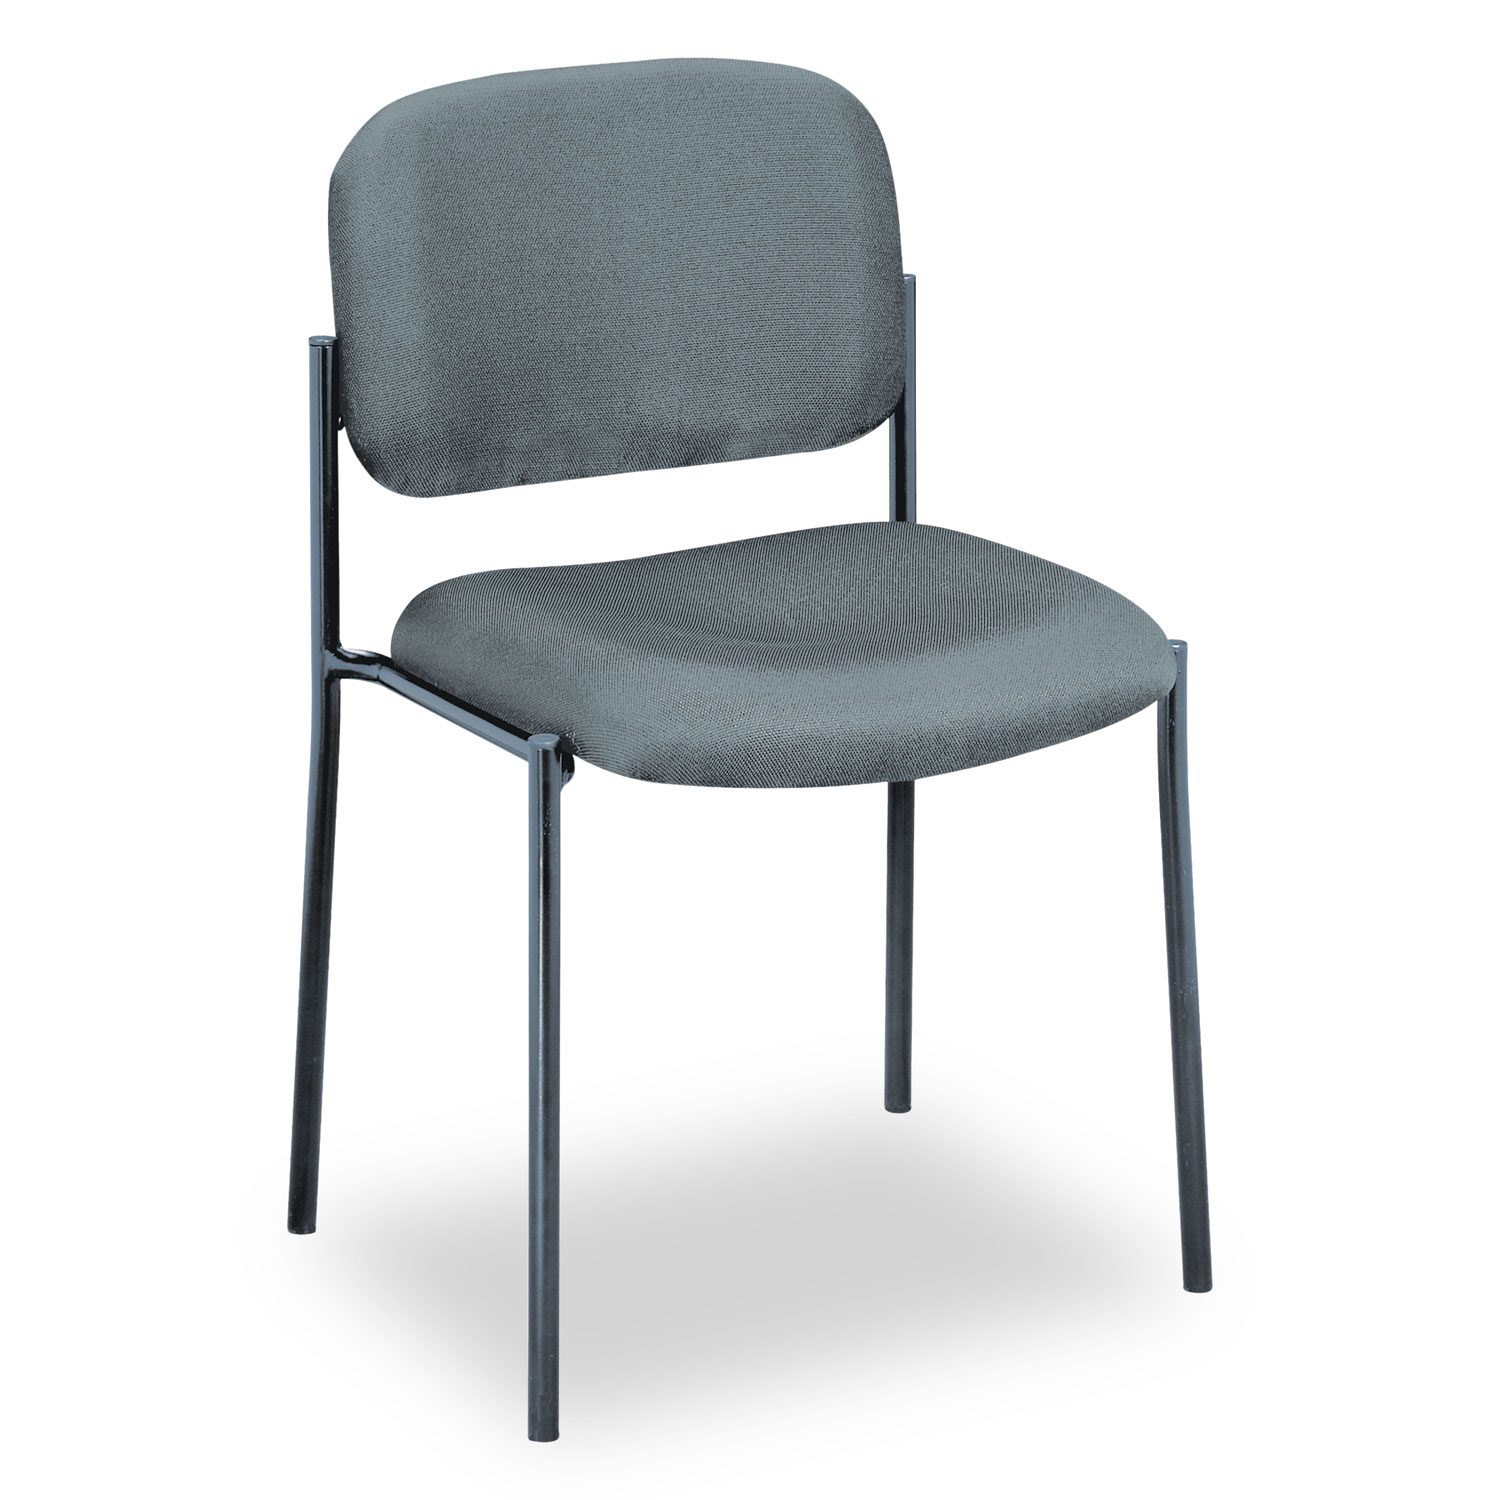  HON HVL606.VA19 VL606 Stacking Guest Chair without Arms, Charcoal Seat/Charcoal Back, Black Base (BSXVL606VA19) 